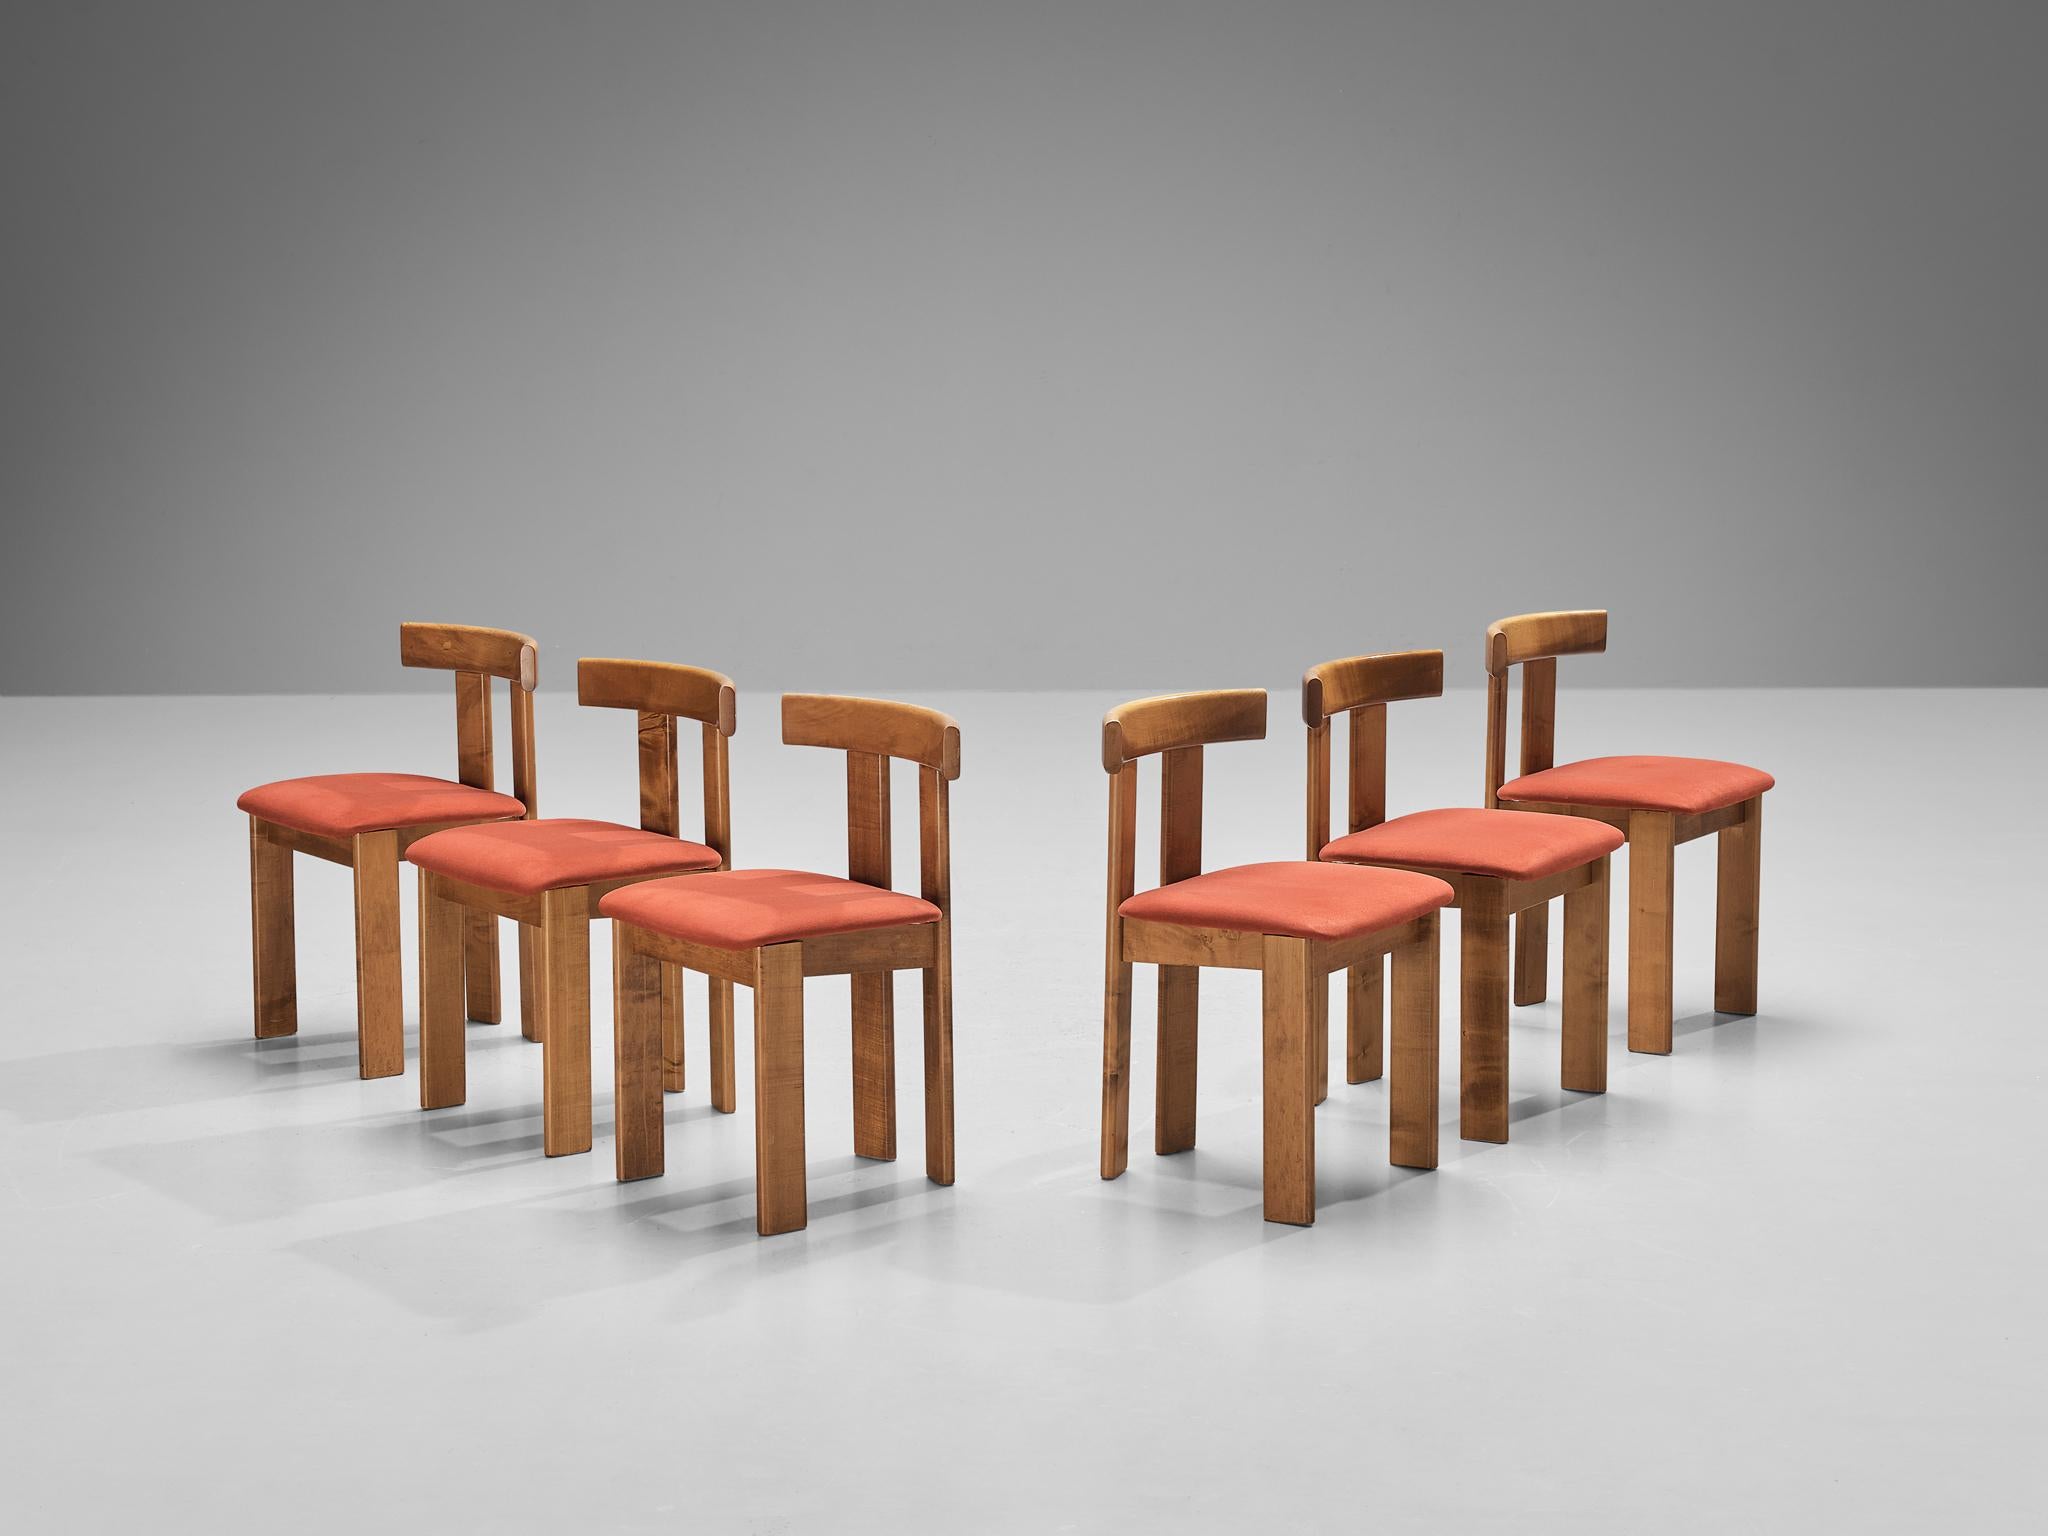 Luigi Vaghi for Former, set of six dining chairs, stained walnut, alcantara, Italy, 1960s. 

A characteristic 'T-chair' design; simplistic yet very strong in lines and proportions. Wonderful dynamic frame executed in walnut, whereby the rear legs